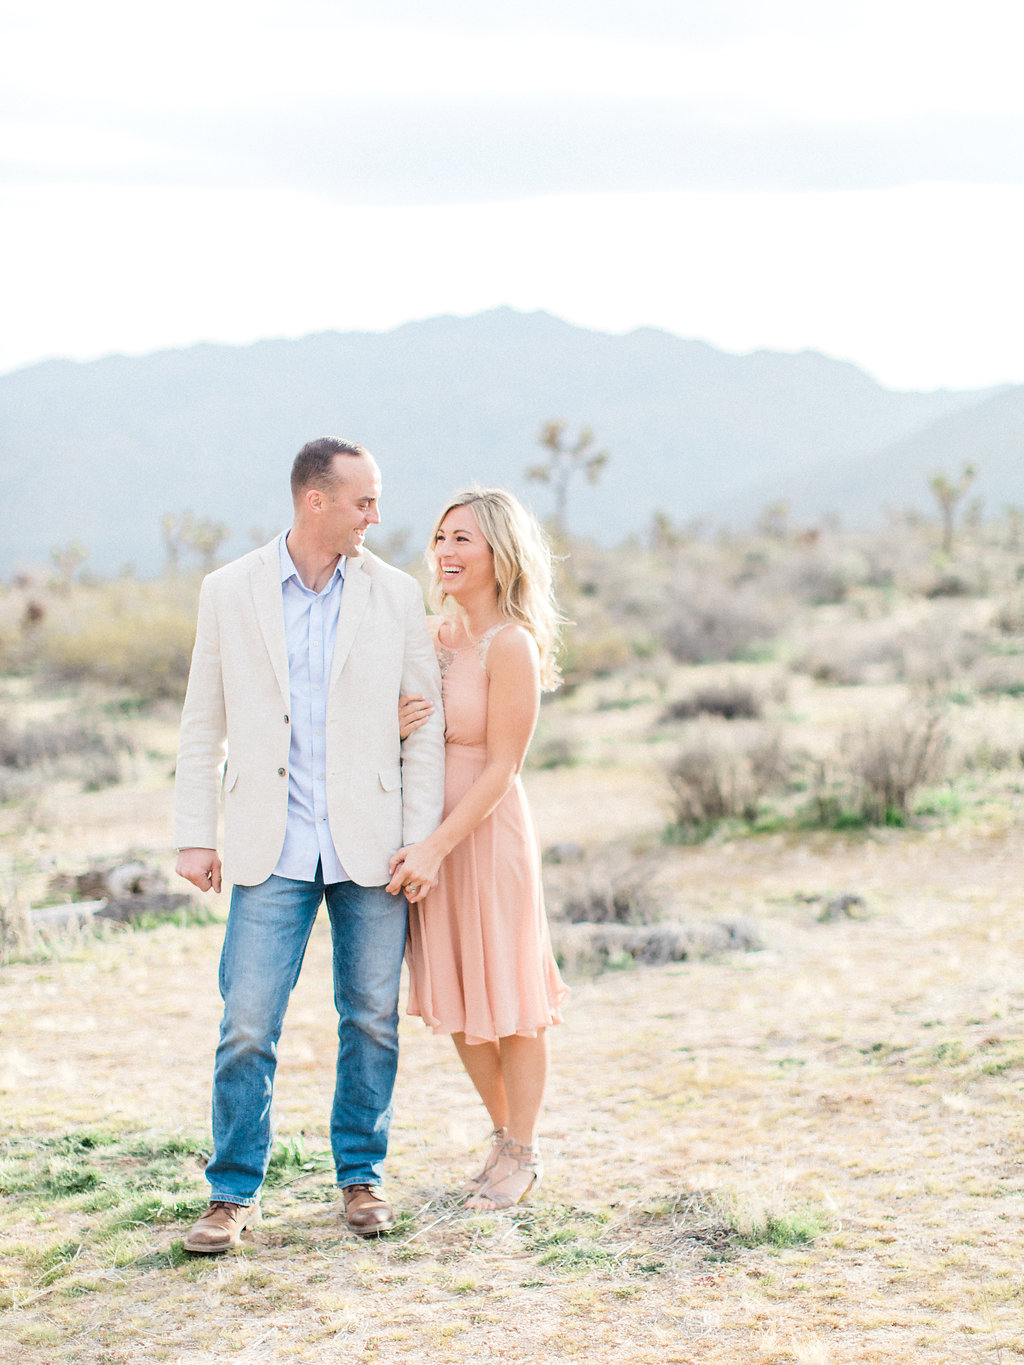 Joshua Tree Engagement Session | What to Wear for Pictures | Southern California Wedding Photographer | Mastin Labs Fuji Film | Fine Art Photographer | Desert Shoot | Natural Session in the Desert.jpg